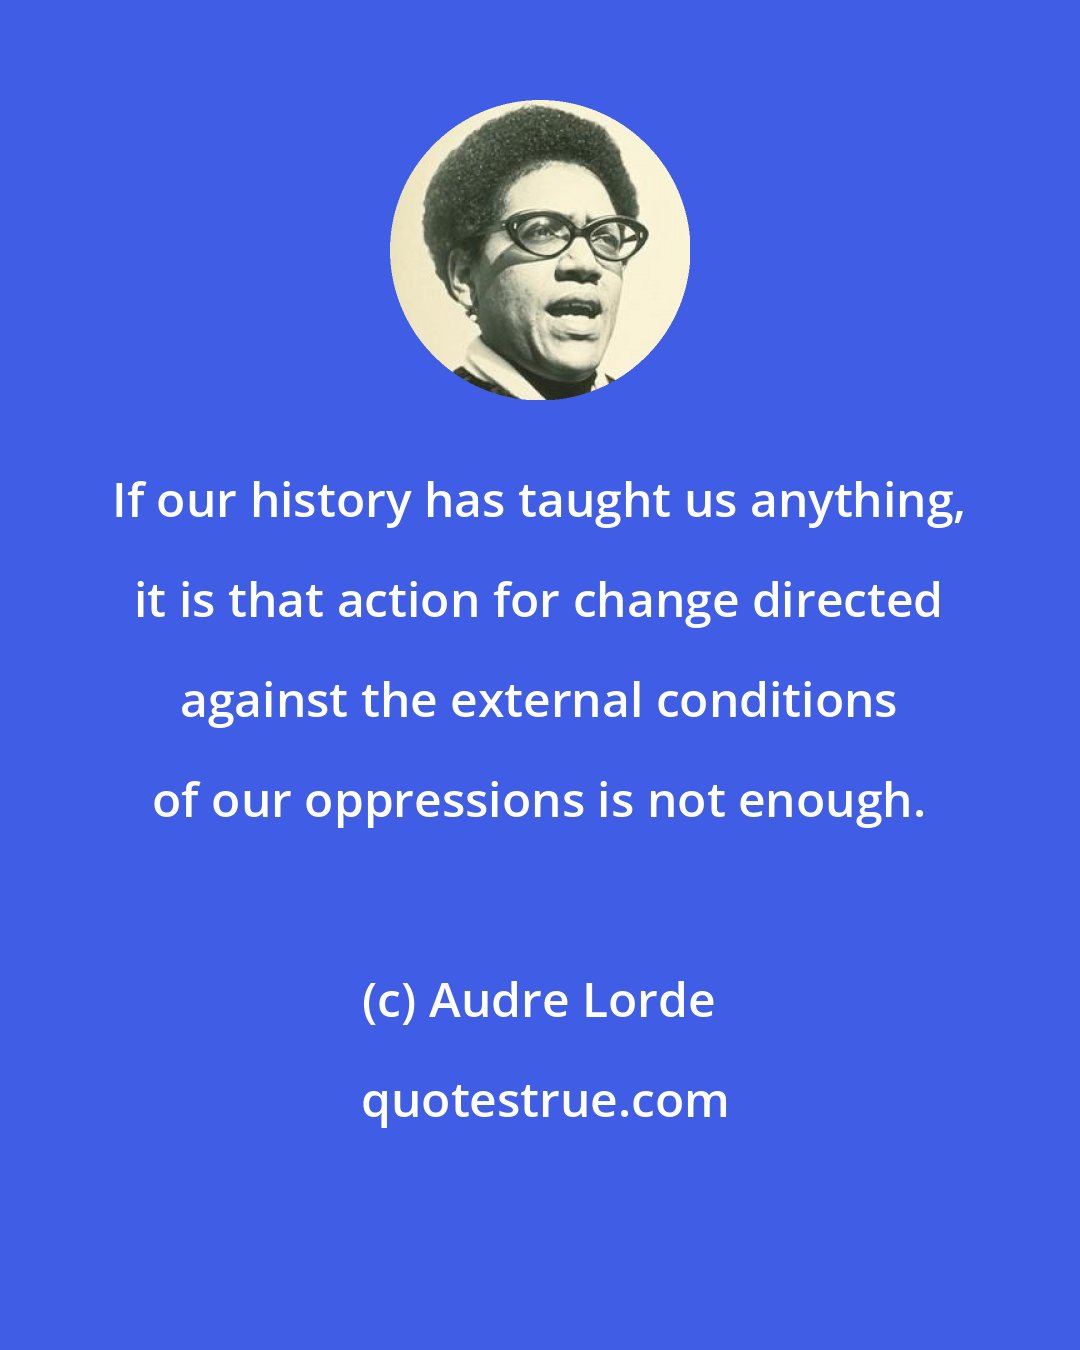 Audre Lorde: If our history has taught us anything, it is that action for change directed against the external conditions of our oppressions is not enough.